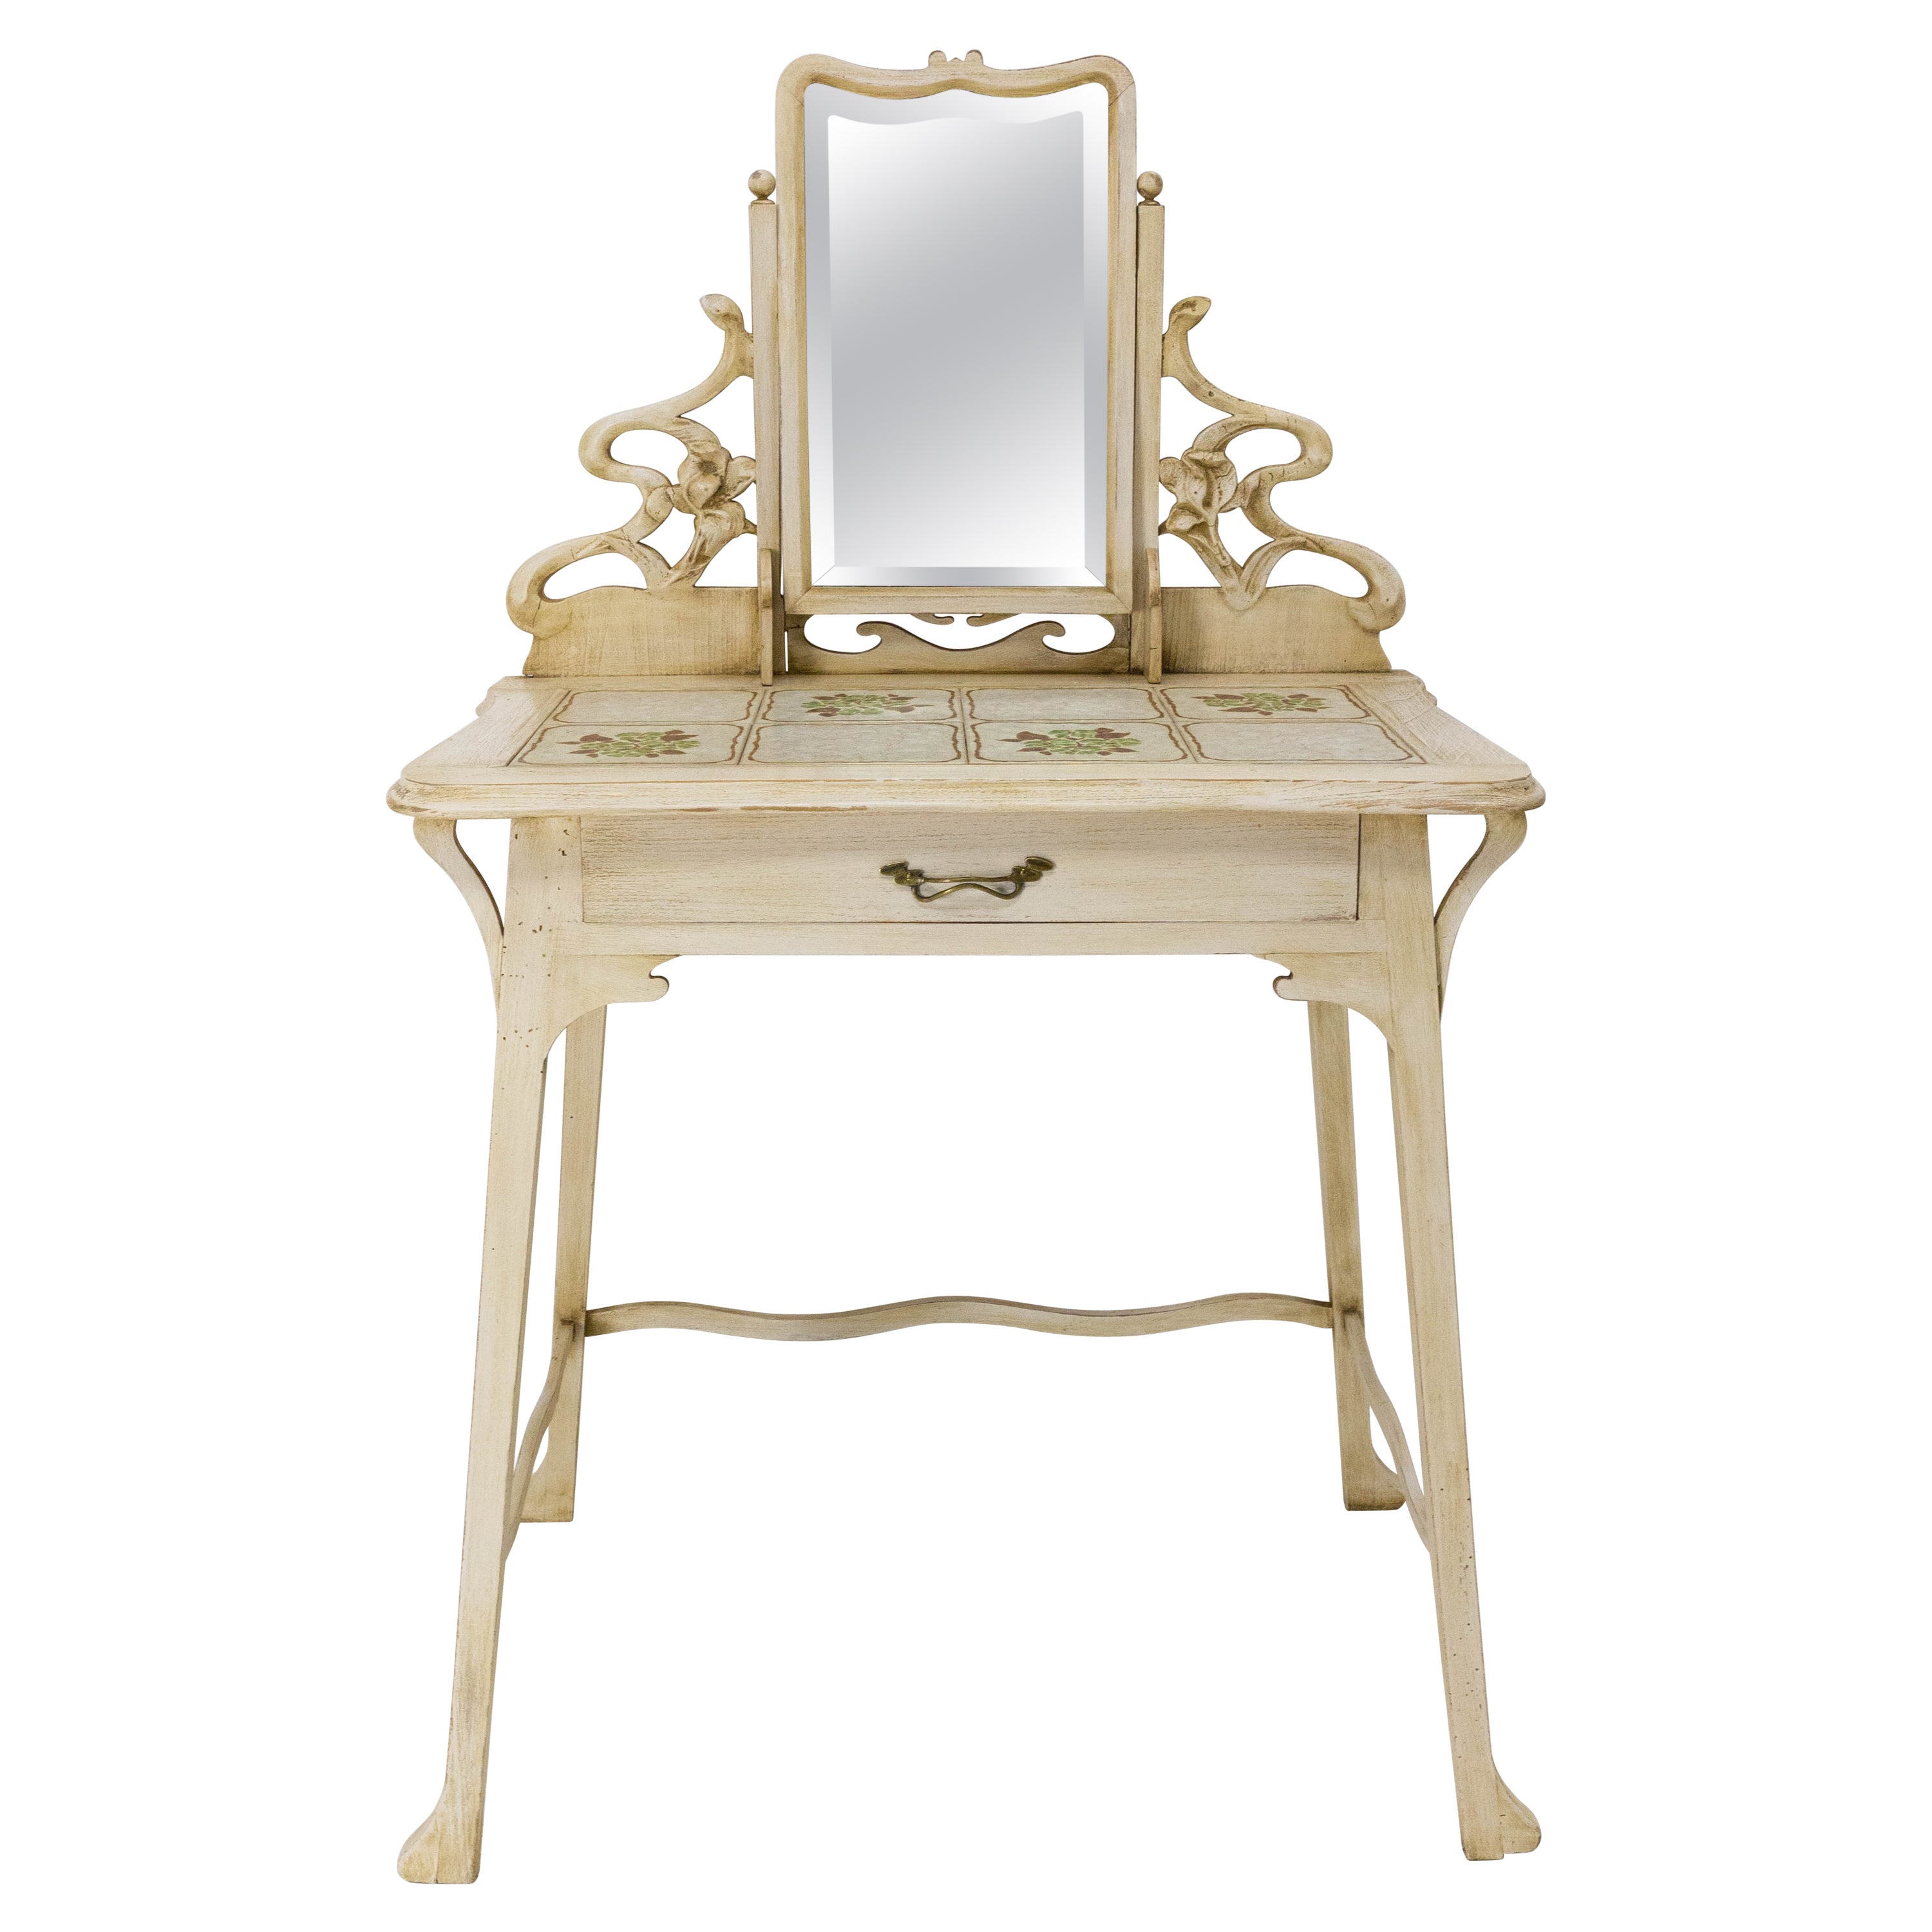 French Art Nouveau Dressing Table Vanity Unit with Beveled Mirror c. 1890